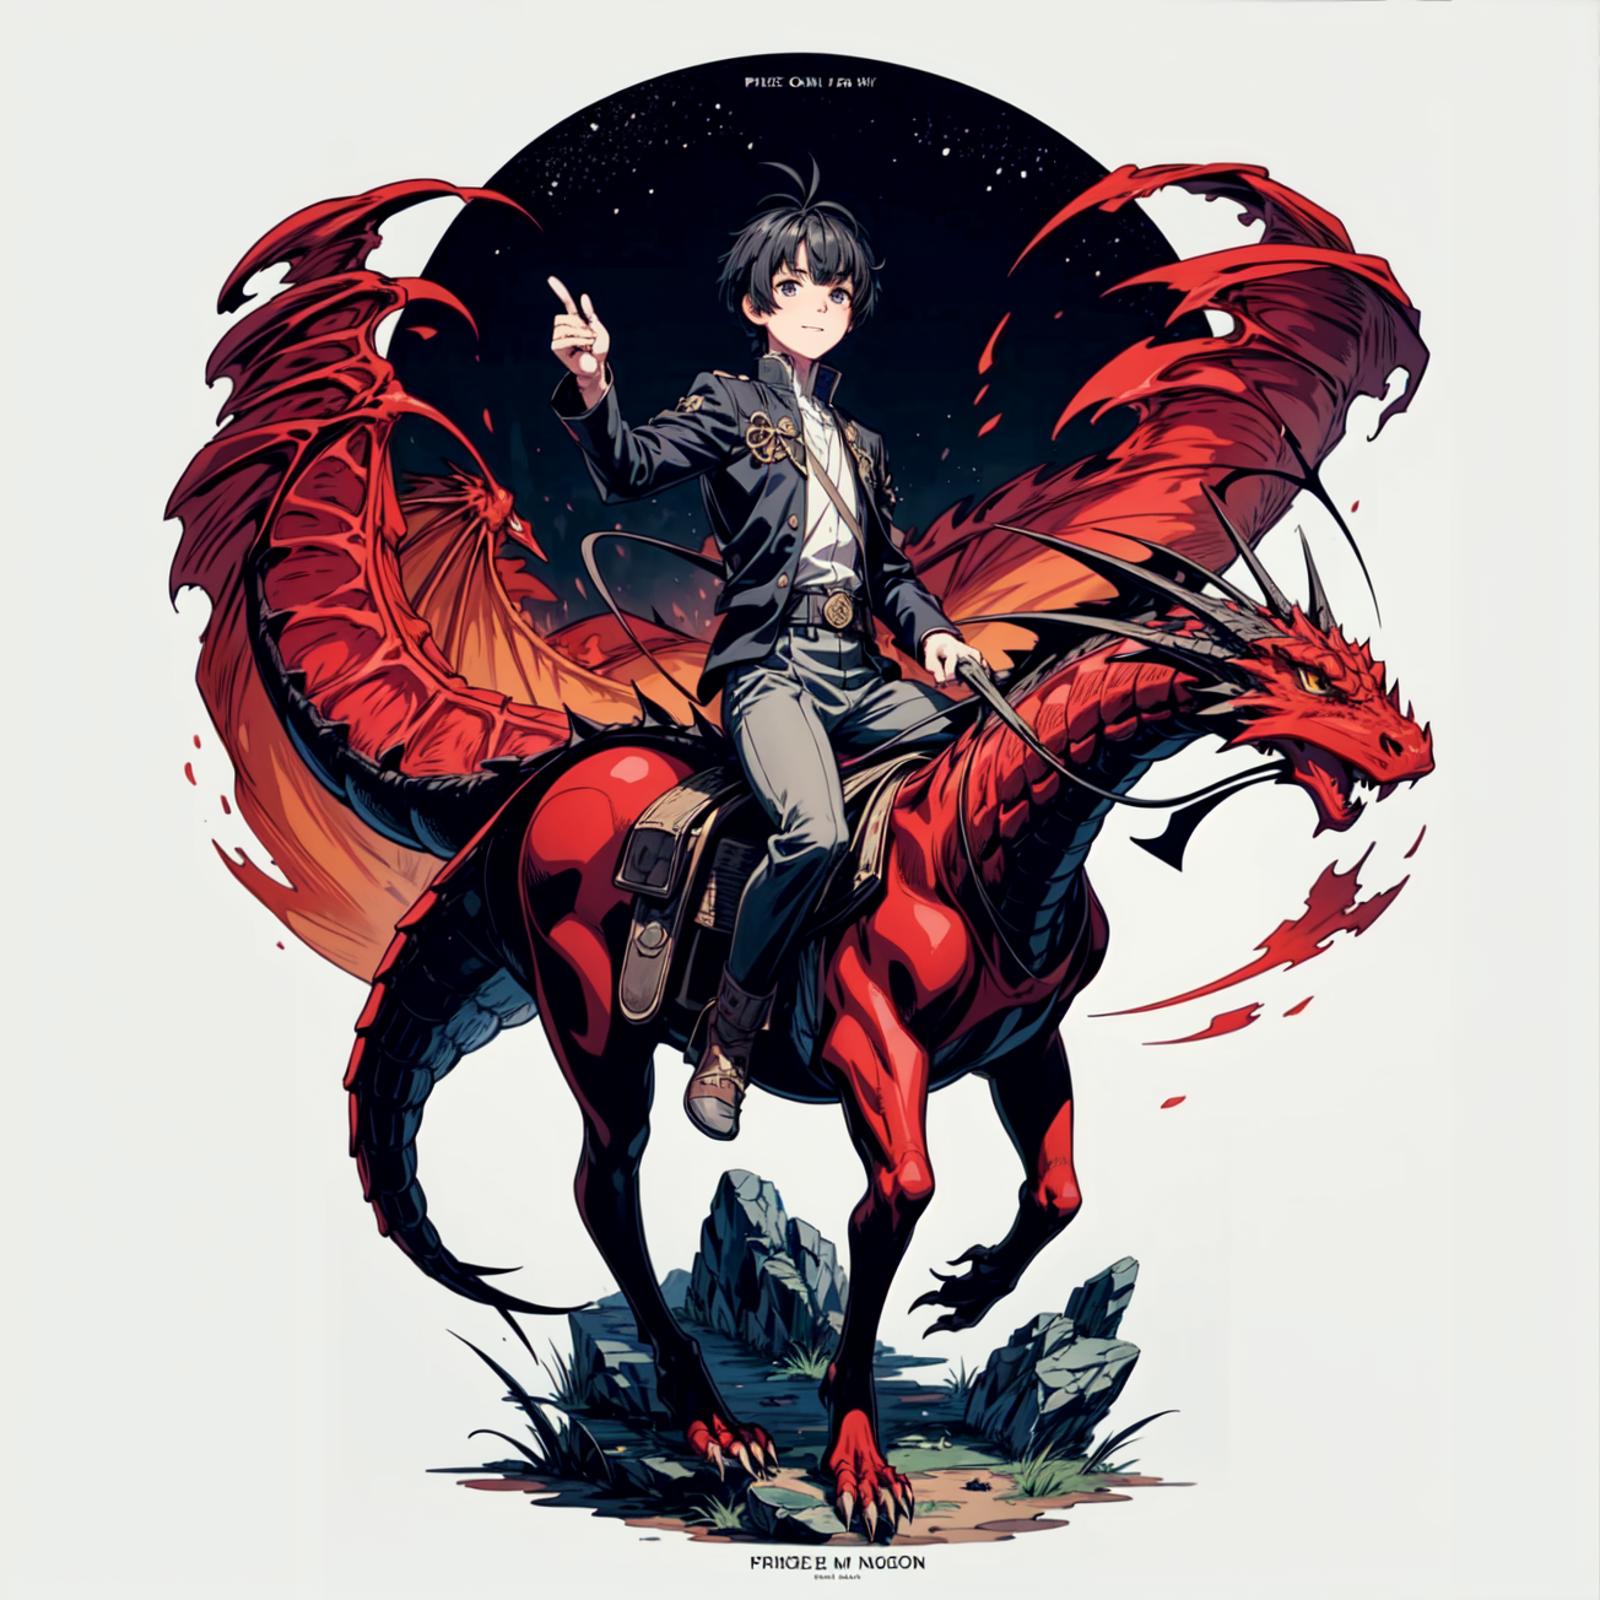 A boy riding a dragon with a sword in his hand.